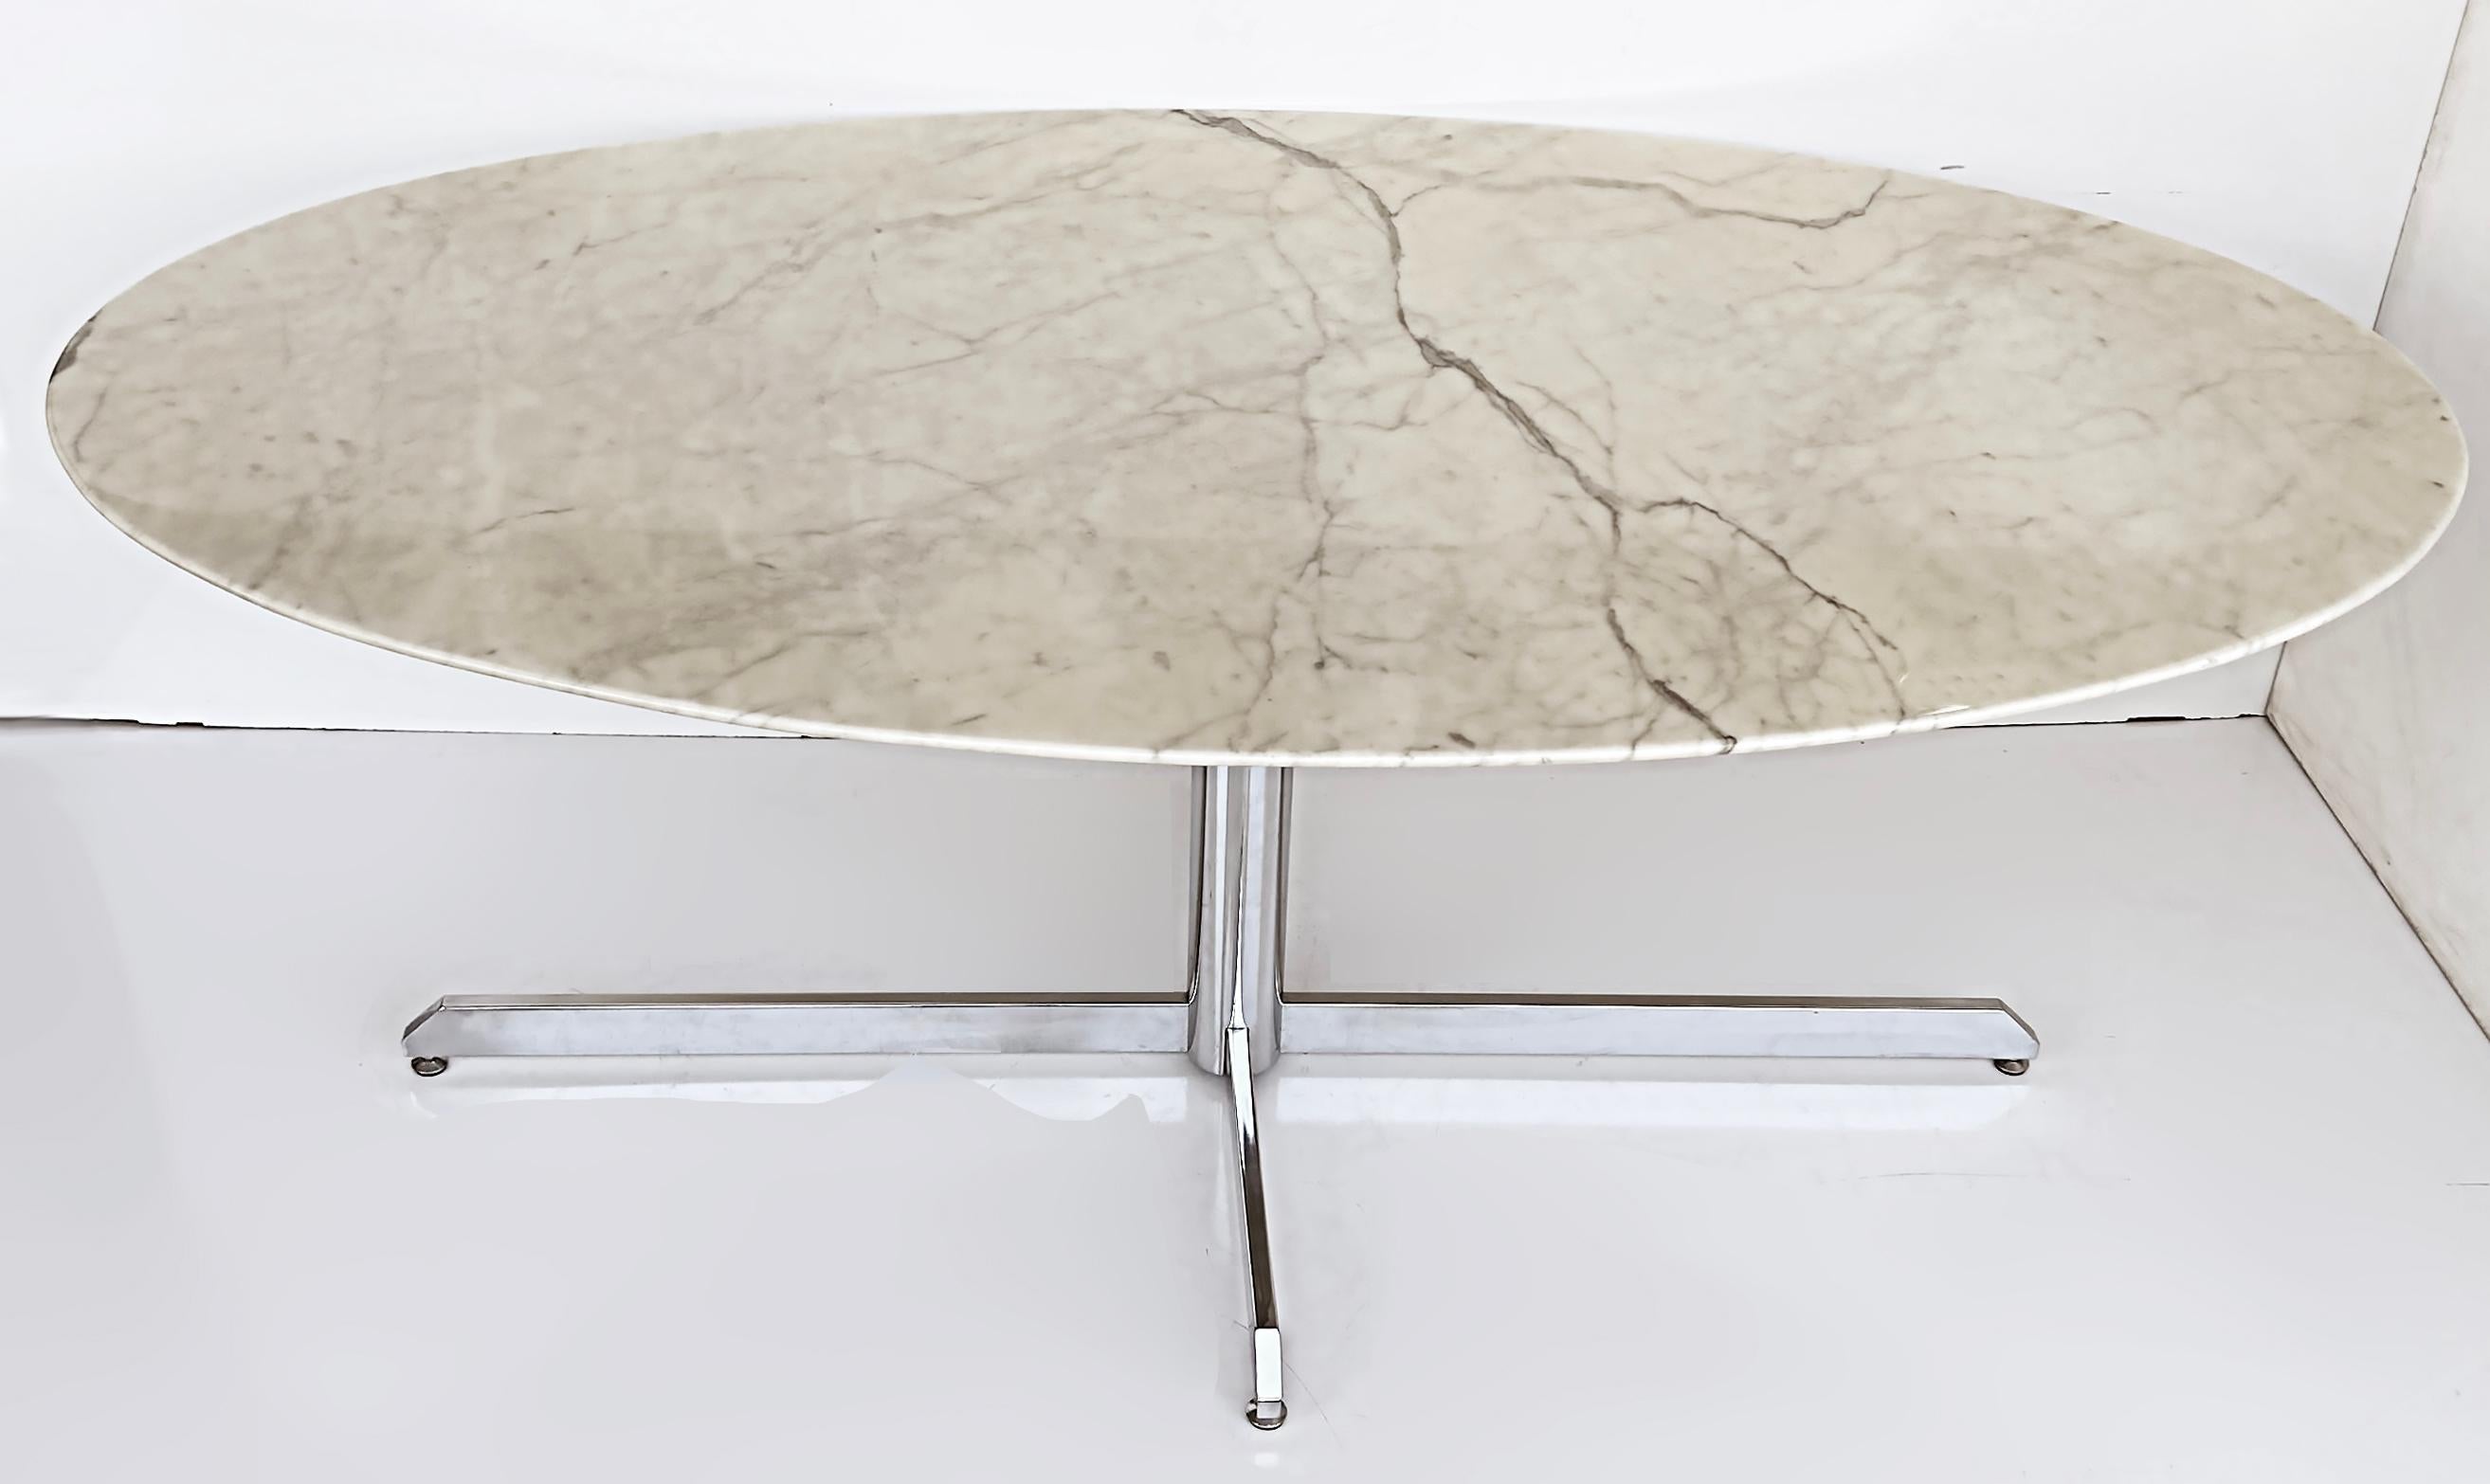 Roche Bobois stainless steel marble dining table, Knoll Style
Offered this Roche Bobois stainless steel and marble dining table created in the style of Florence Knoll. The elongated oval dining table is supported by a polished stainless steel